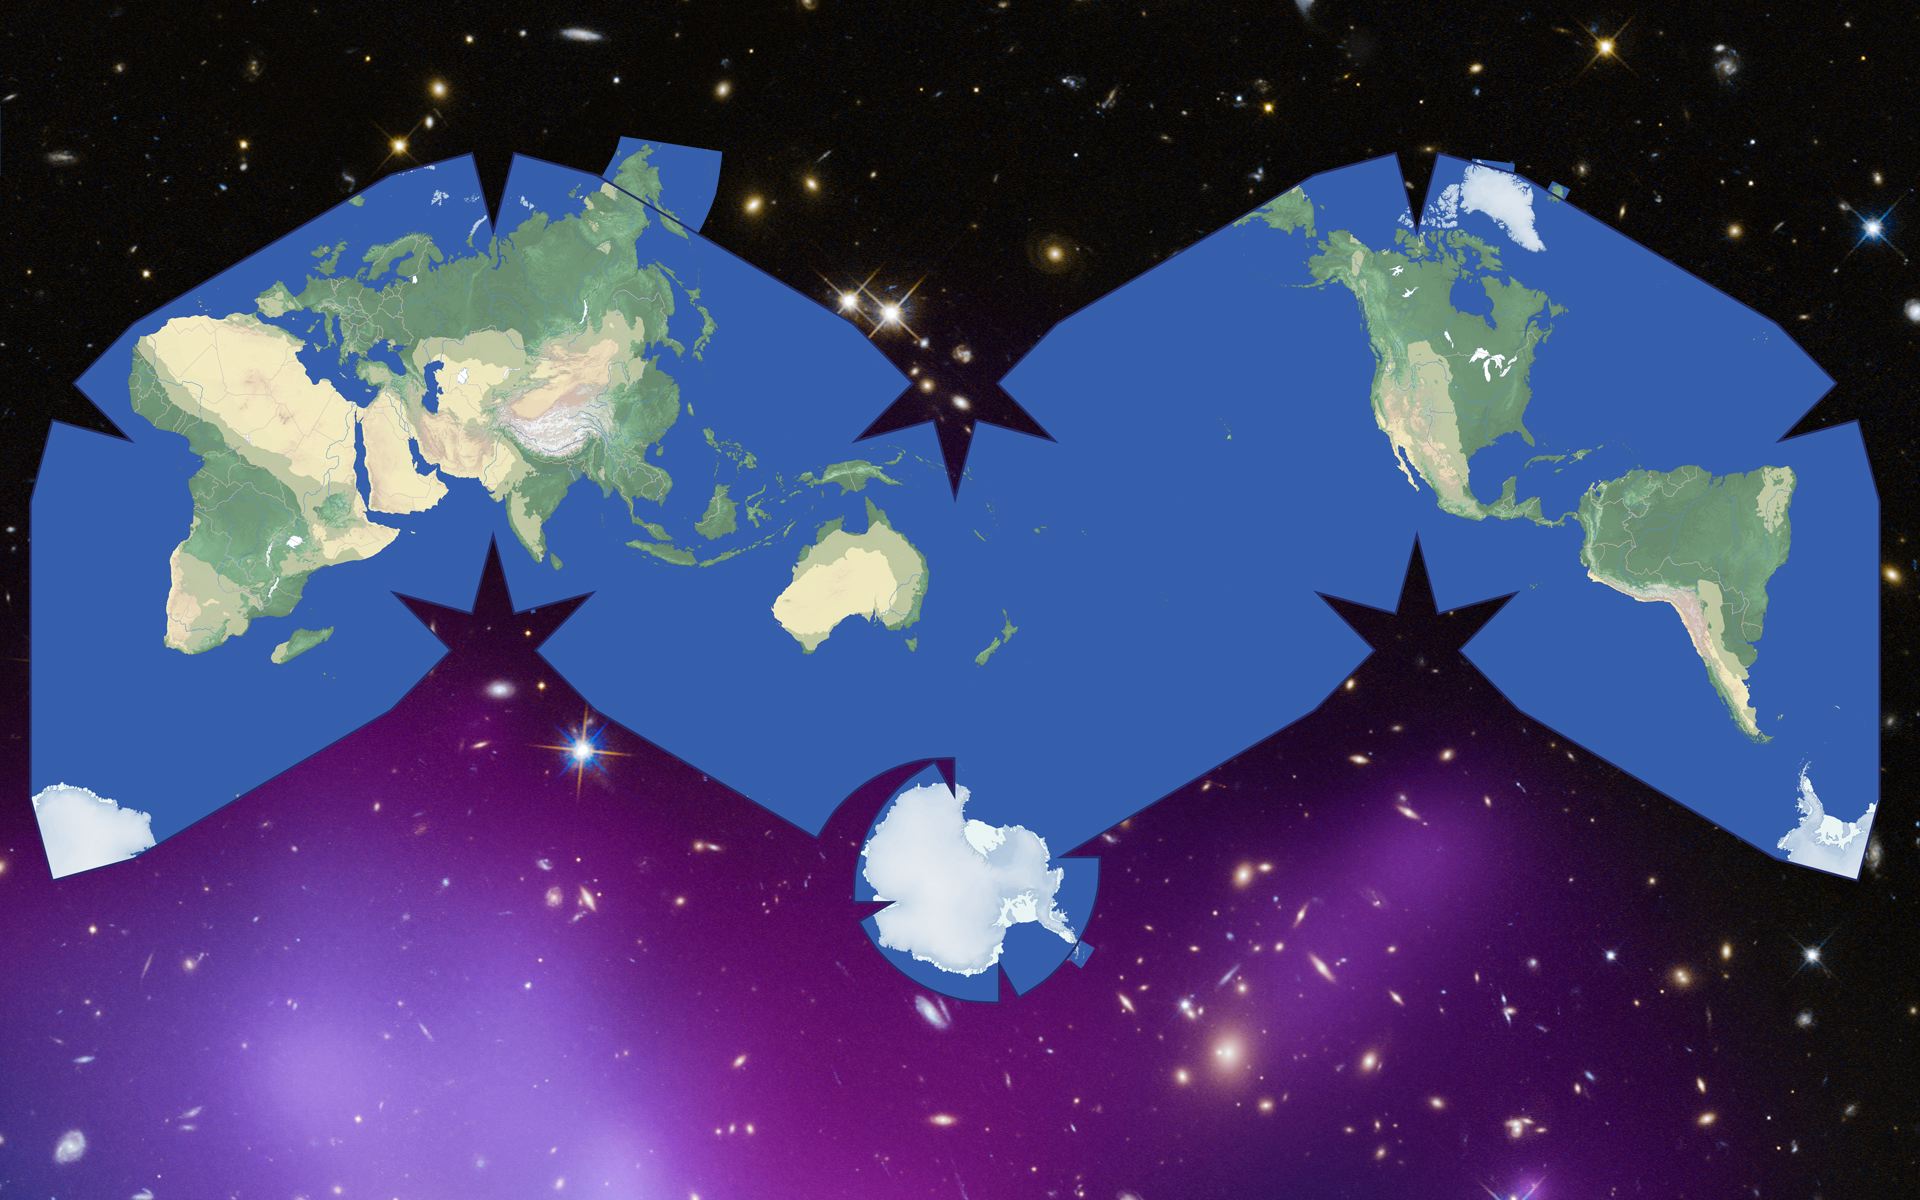 Cahill-Keyes World Map by Duncan Webb in starry background